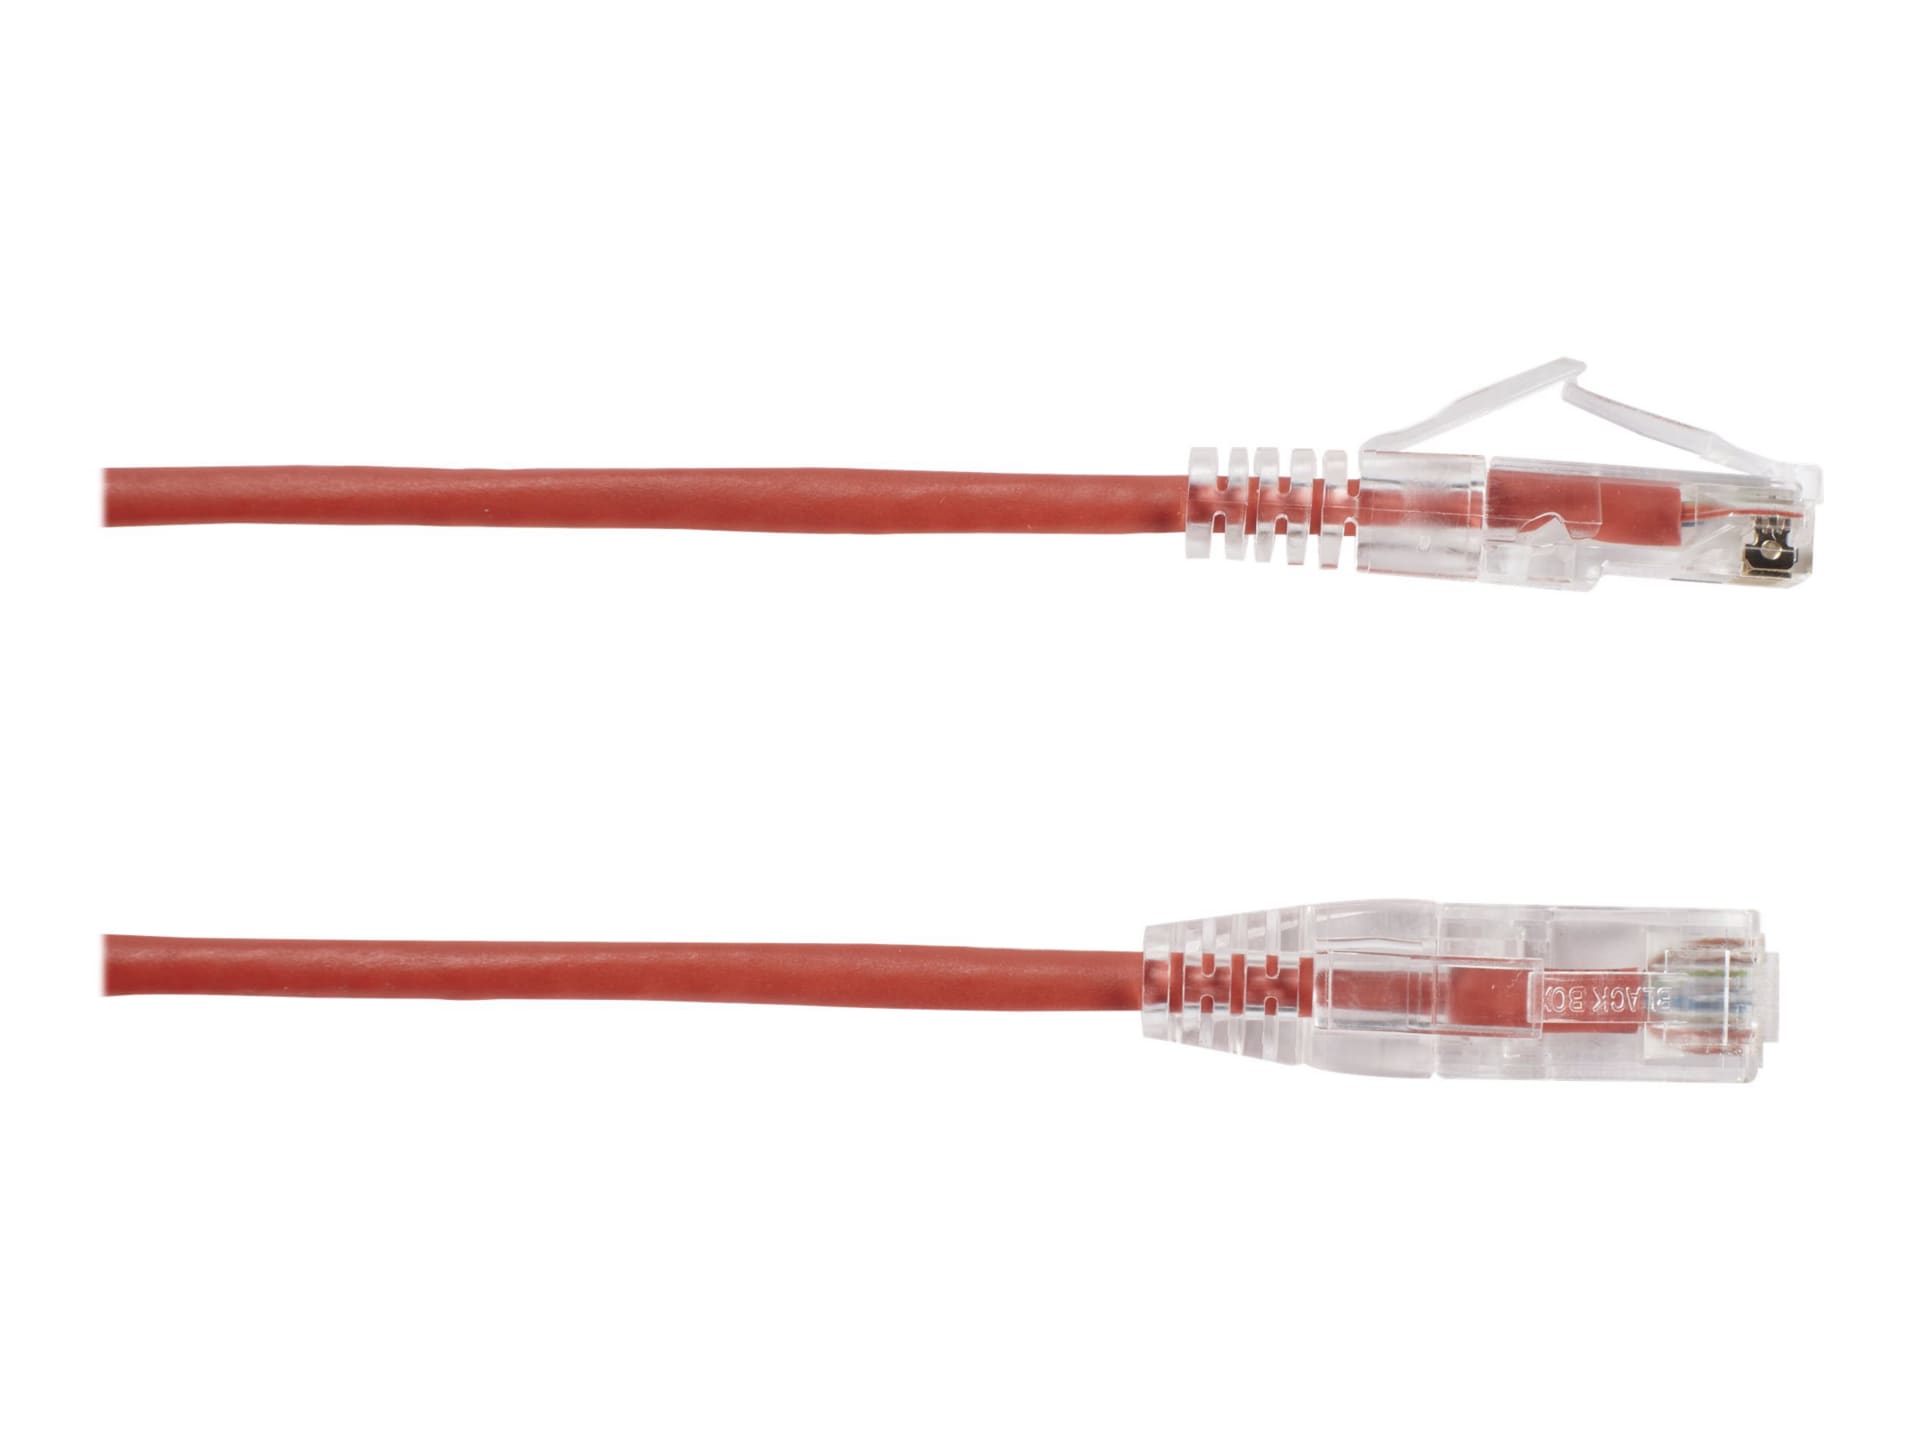 Black Box Slim-Net patch cable - 4 ft - red